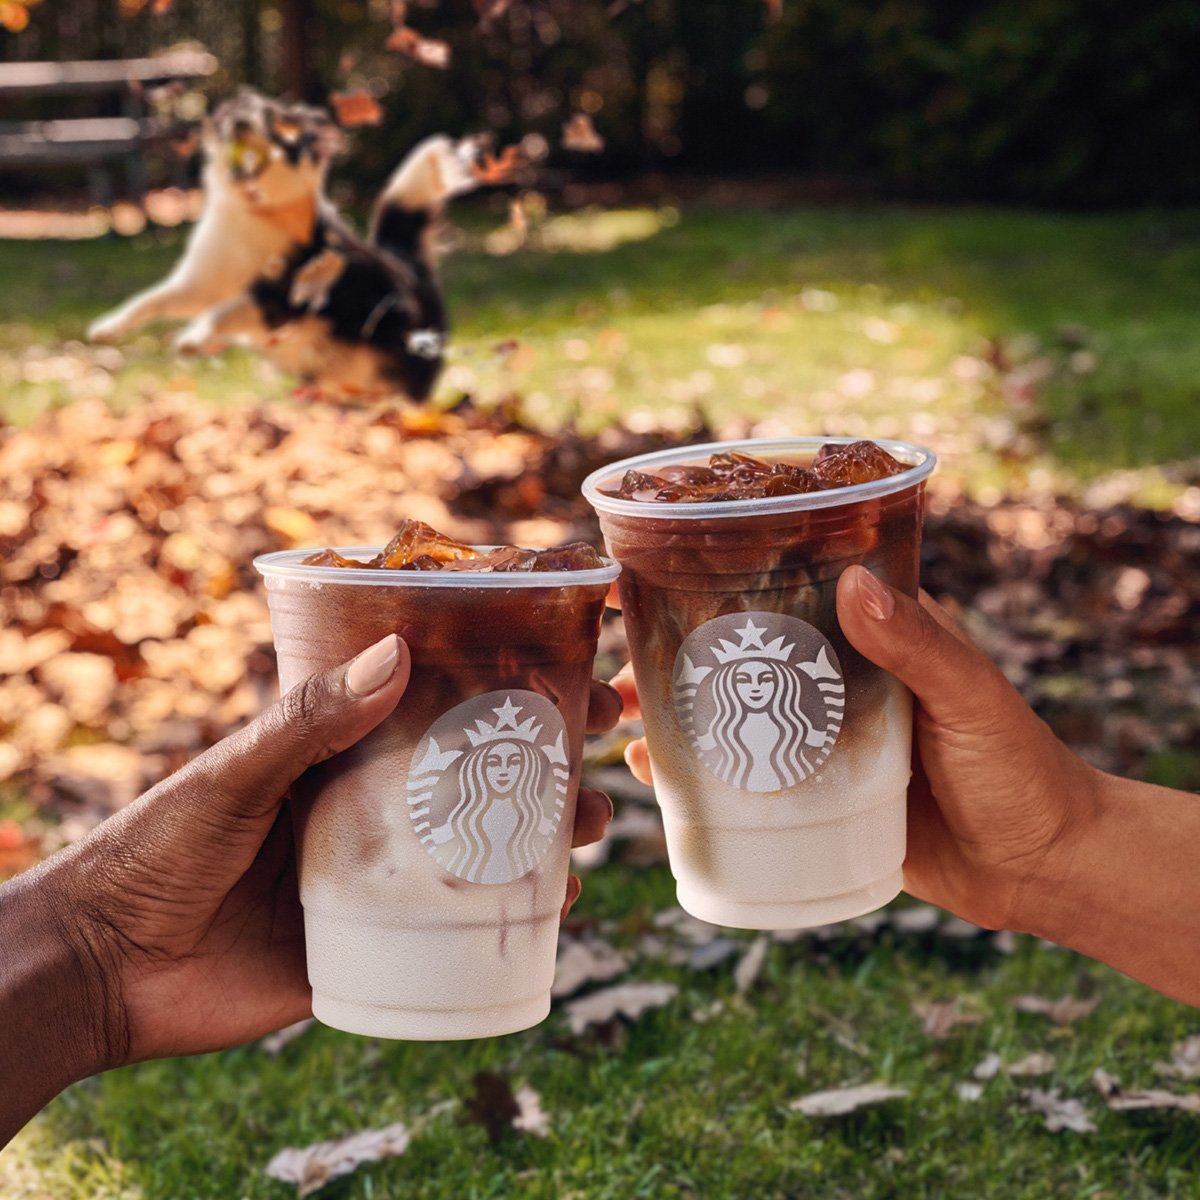 two iced macchiato drinks outdoors